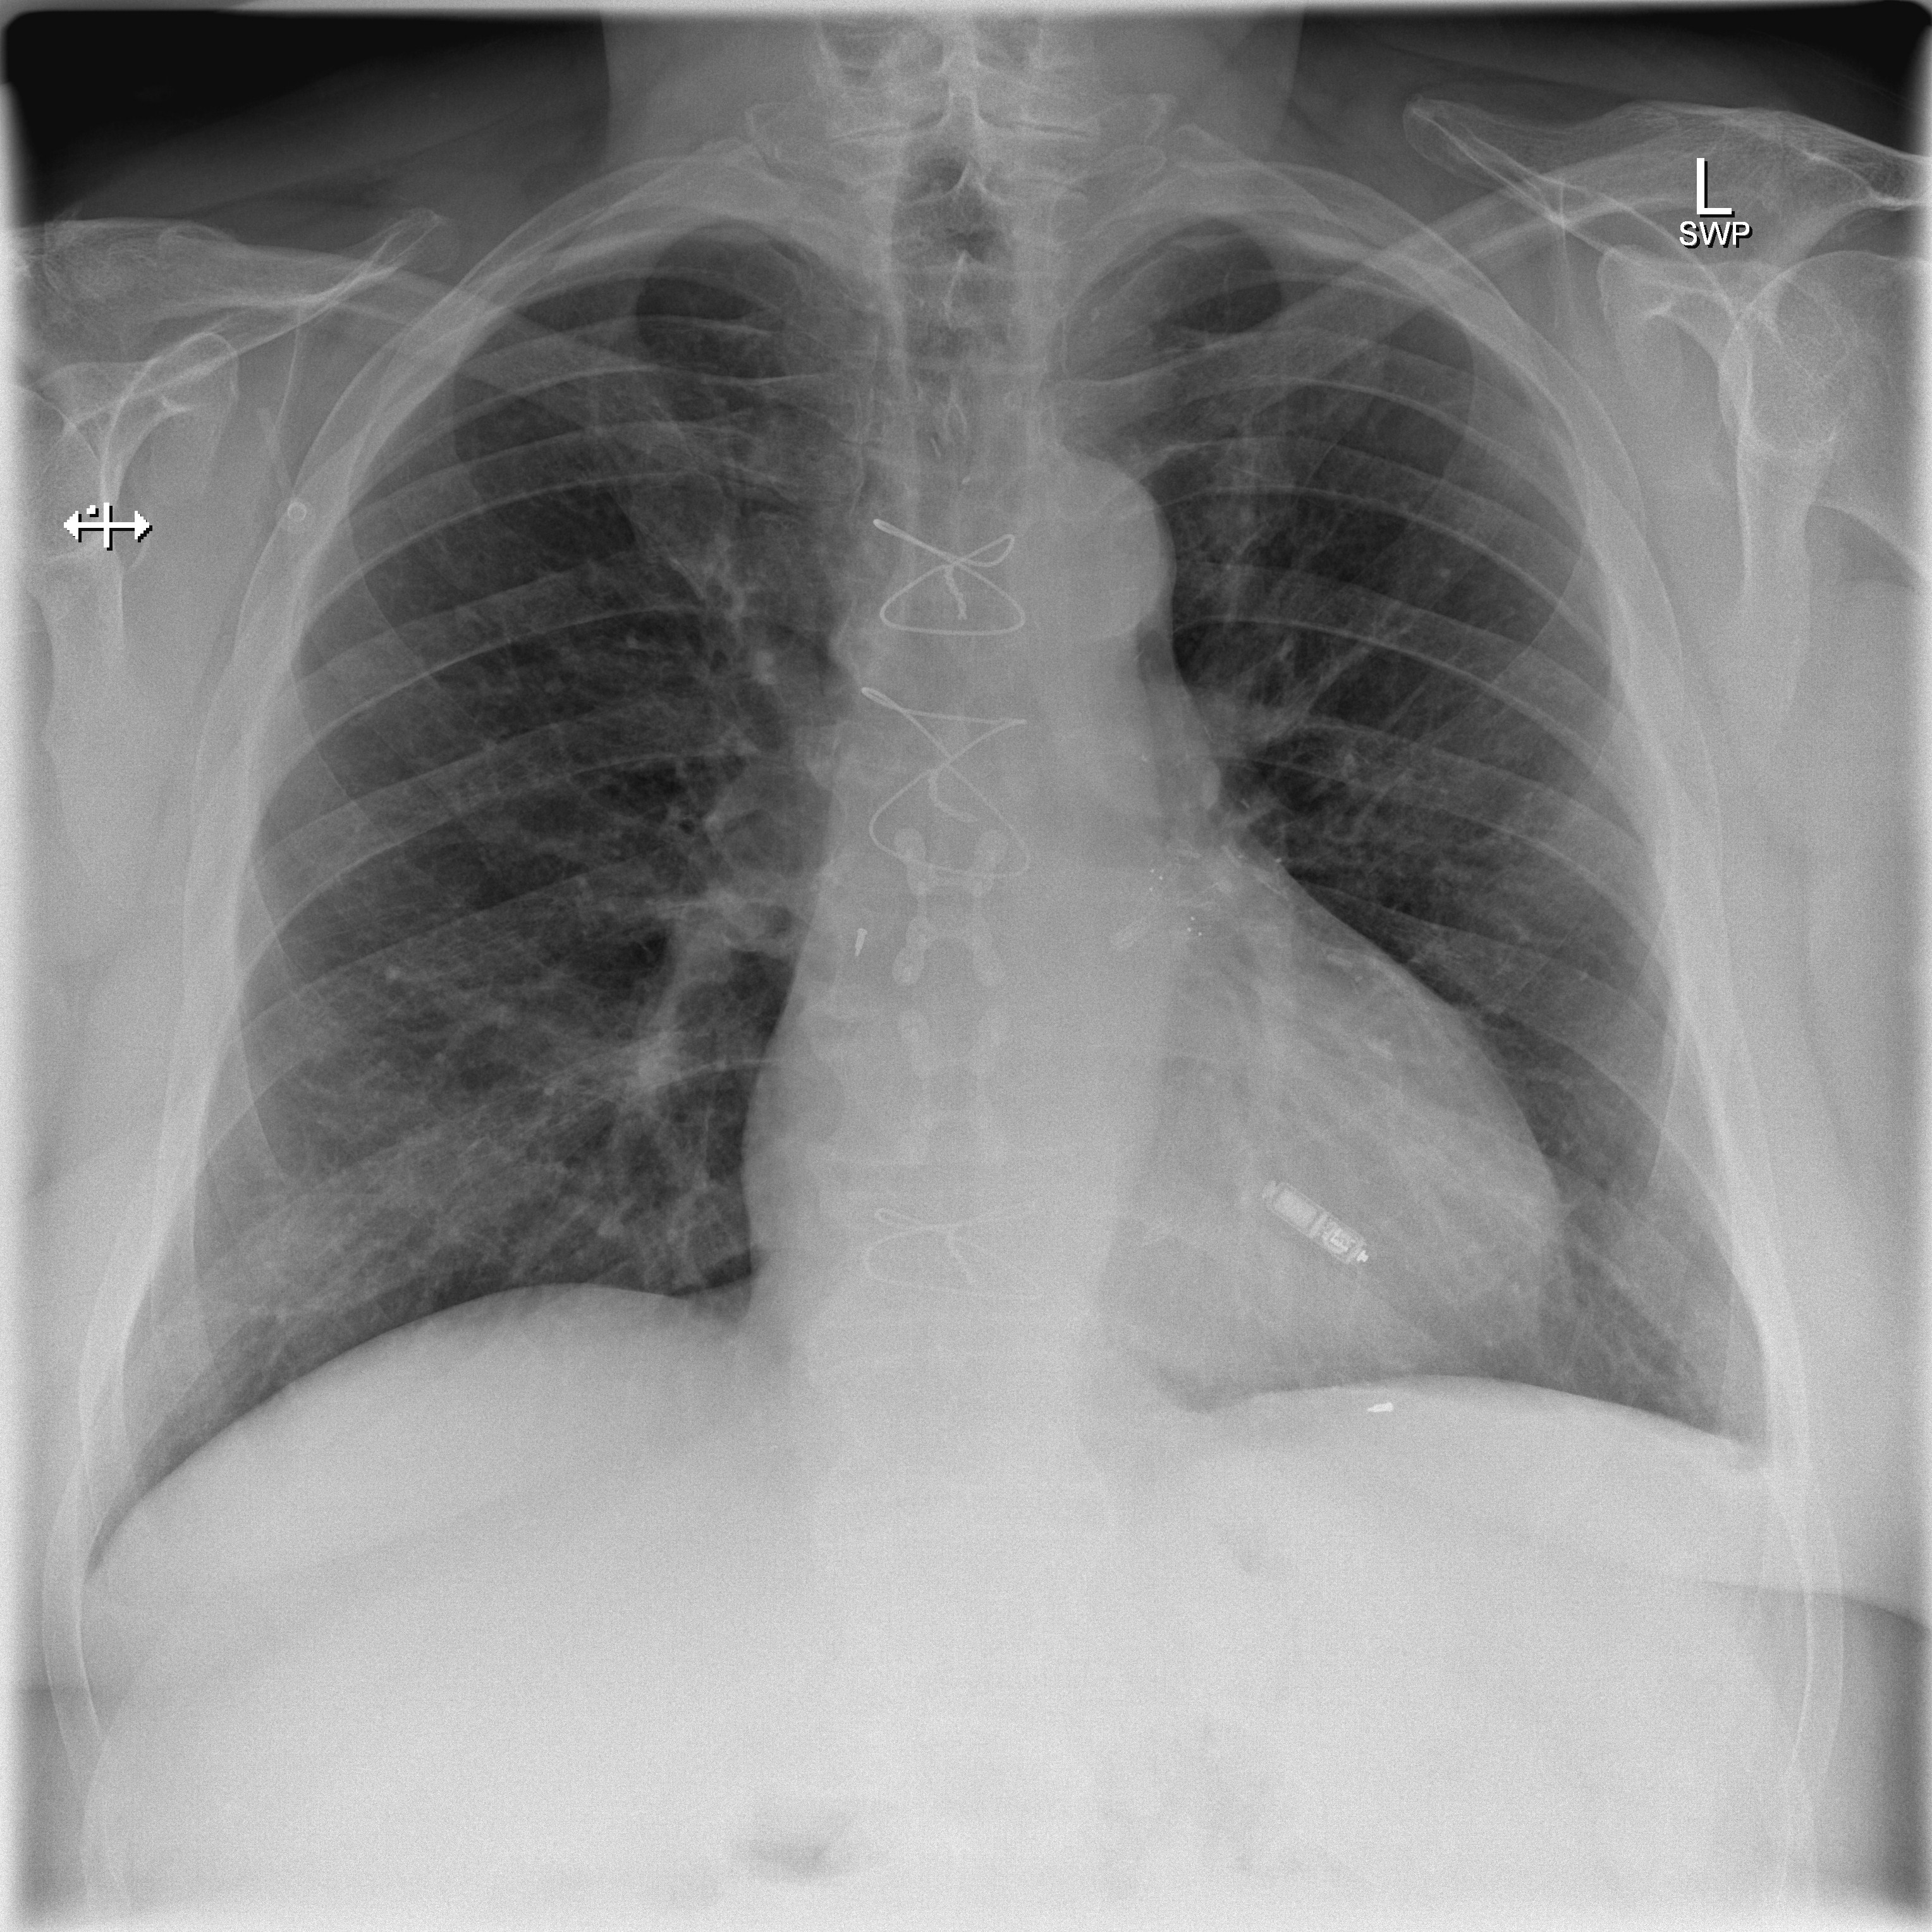 CXR showing a leadless pacemaker in the right ventricle, not to mistake the device with implantable loop recorder (ILR) - Case courtesy of Dr Marianne Cossens , Radiopaedia.org, rID: 61188